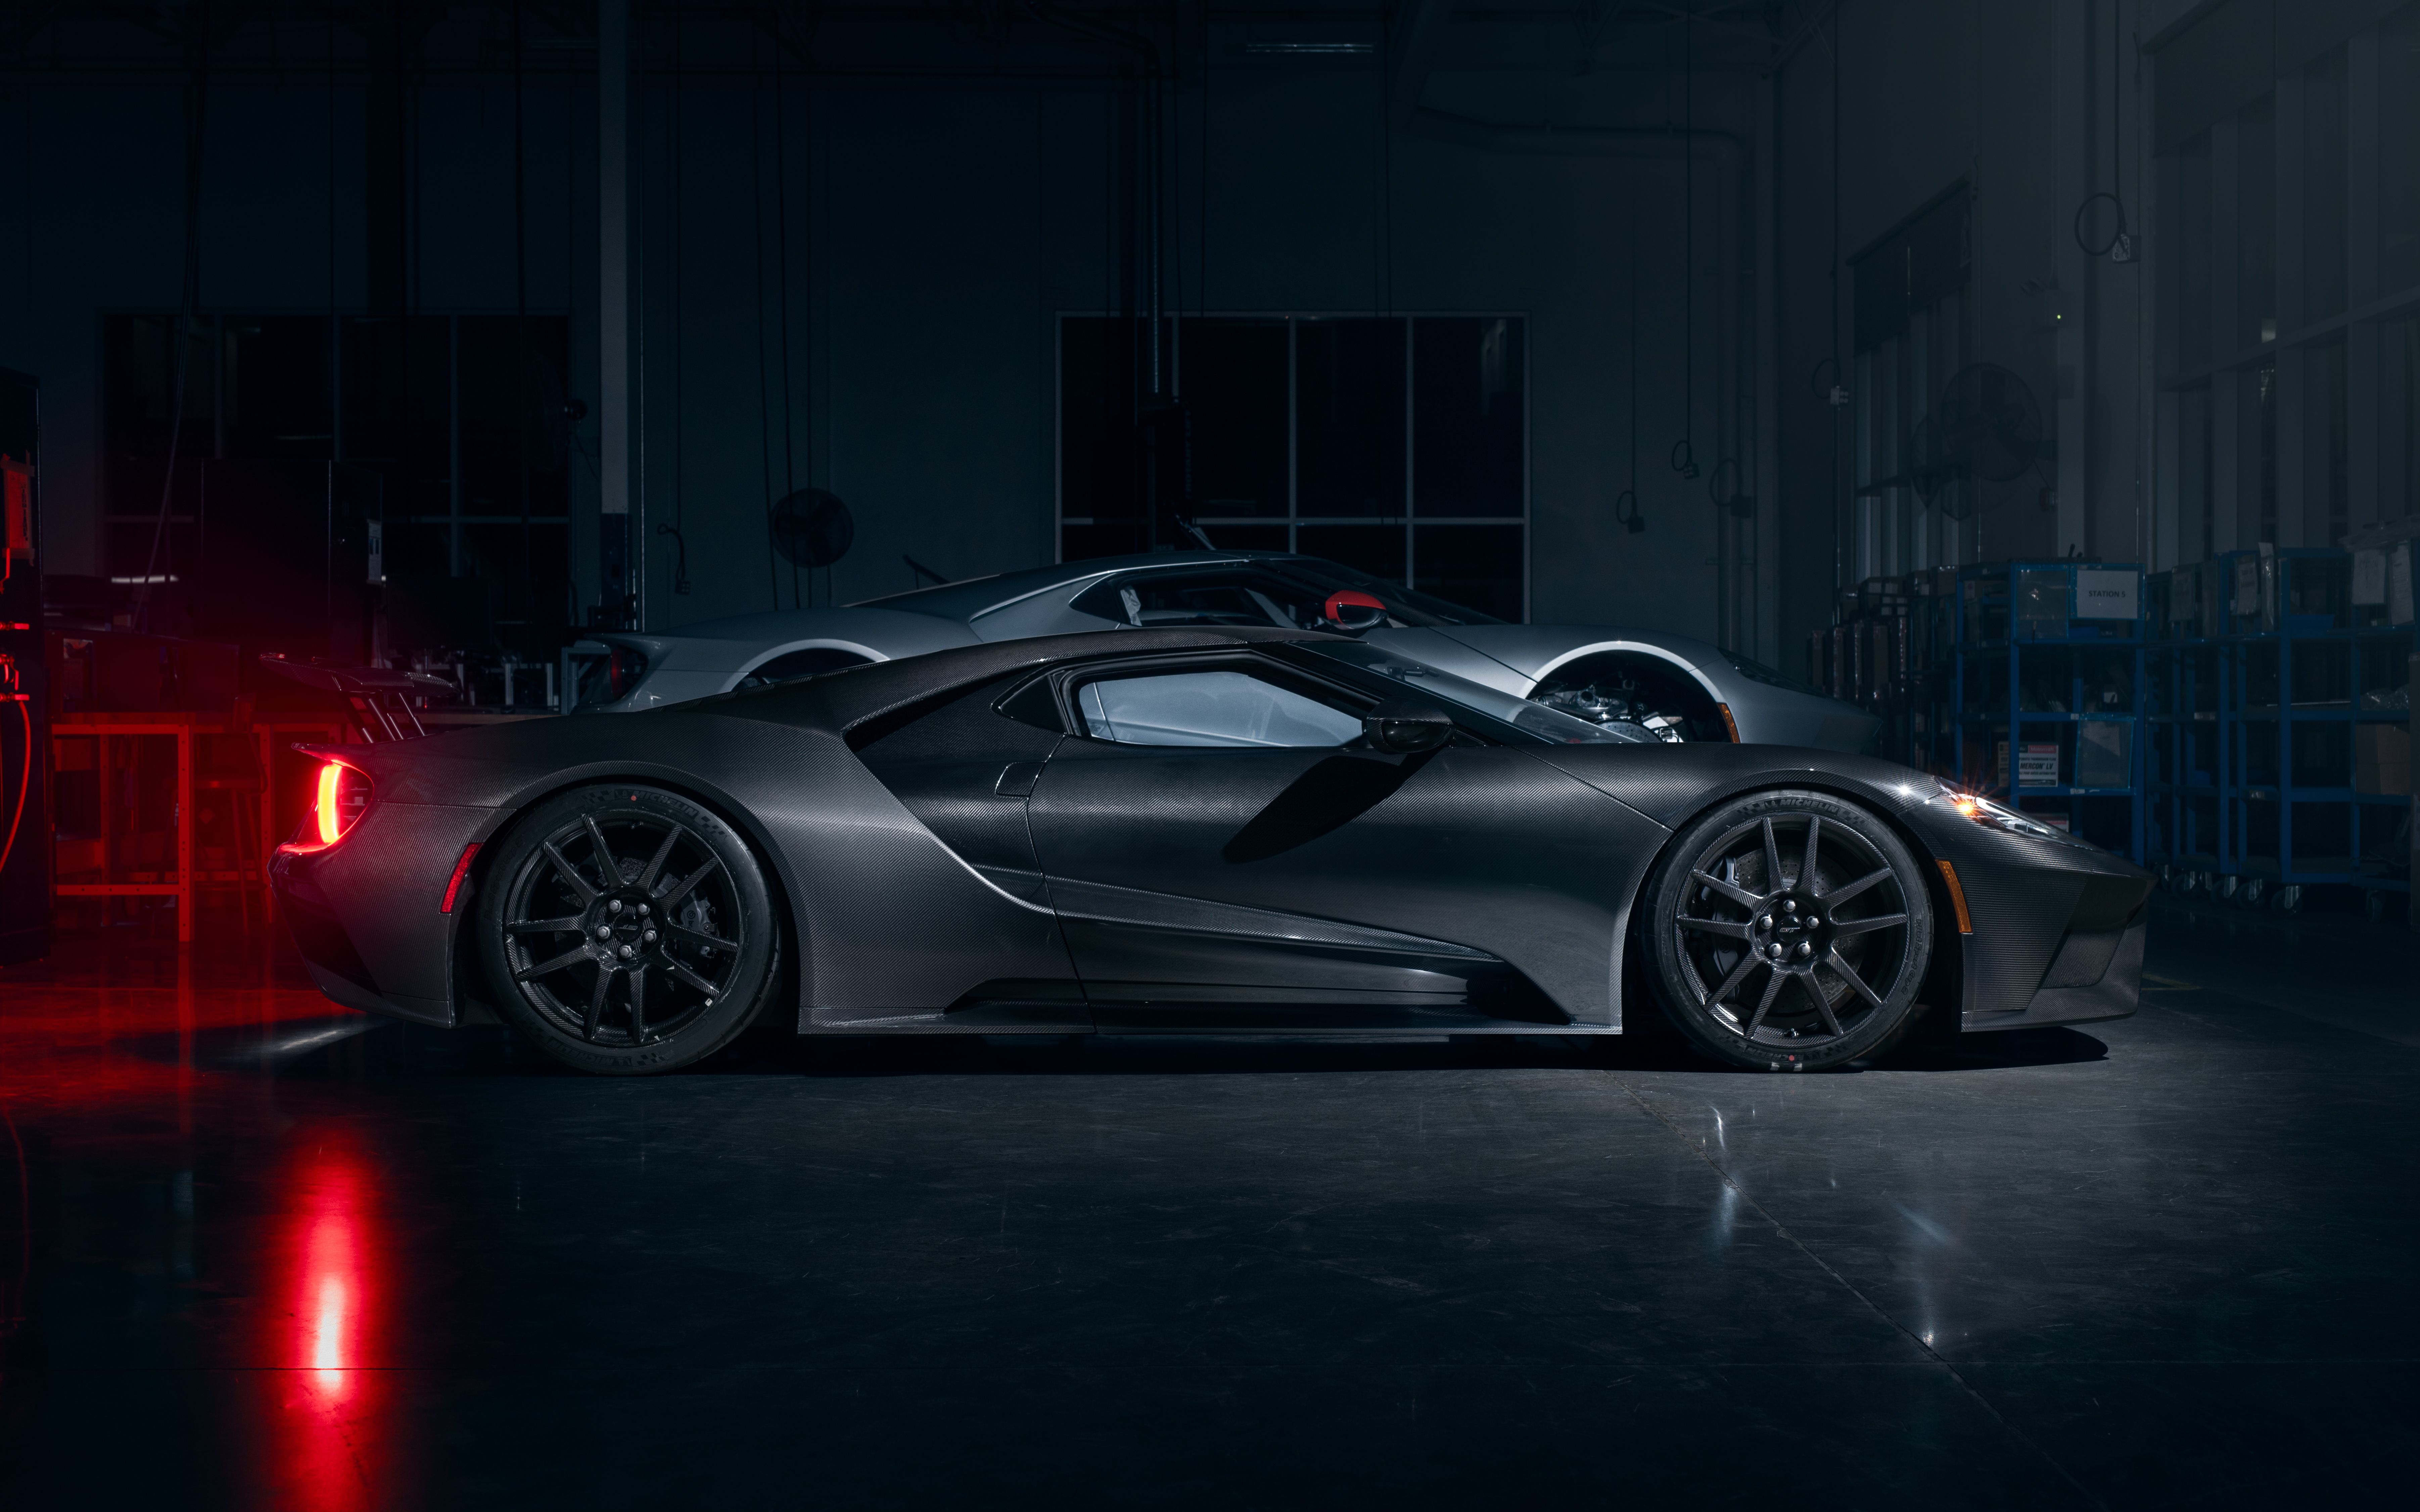 2020 It takes three weeks to build the Ford GT Liquid Carbon